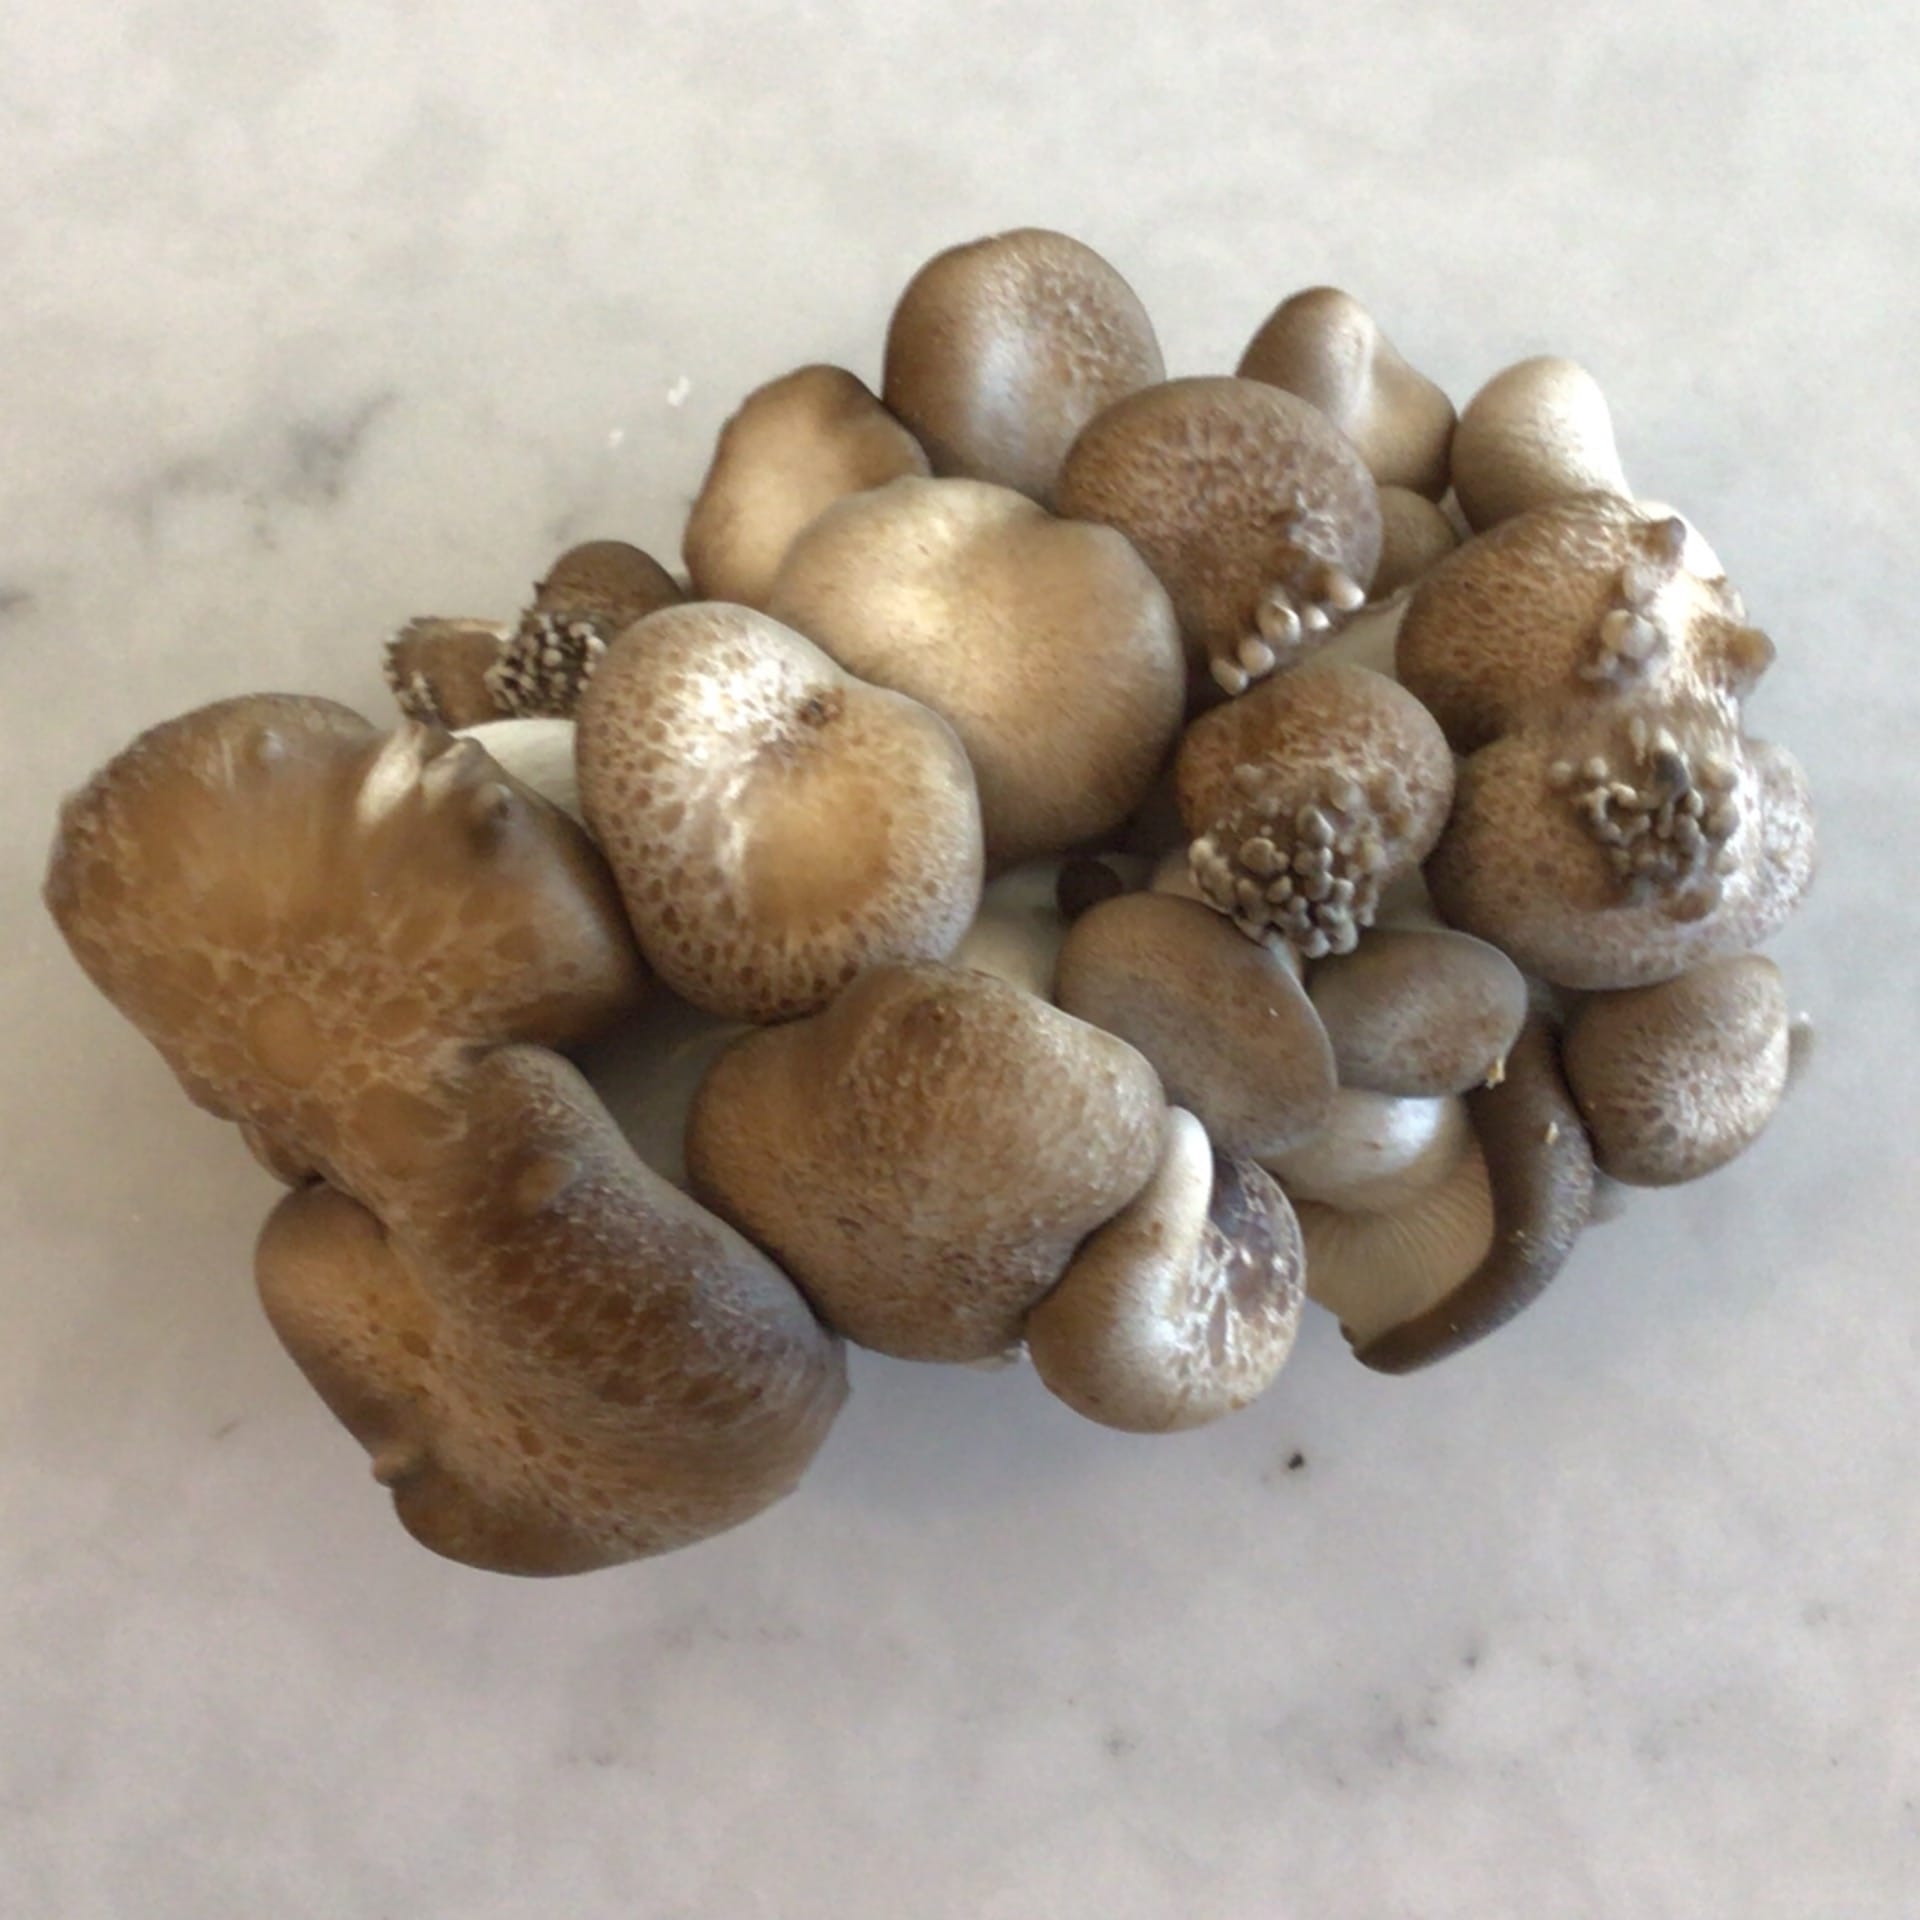 sold out beech mushrooms